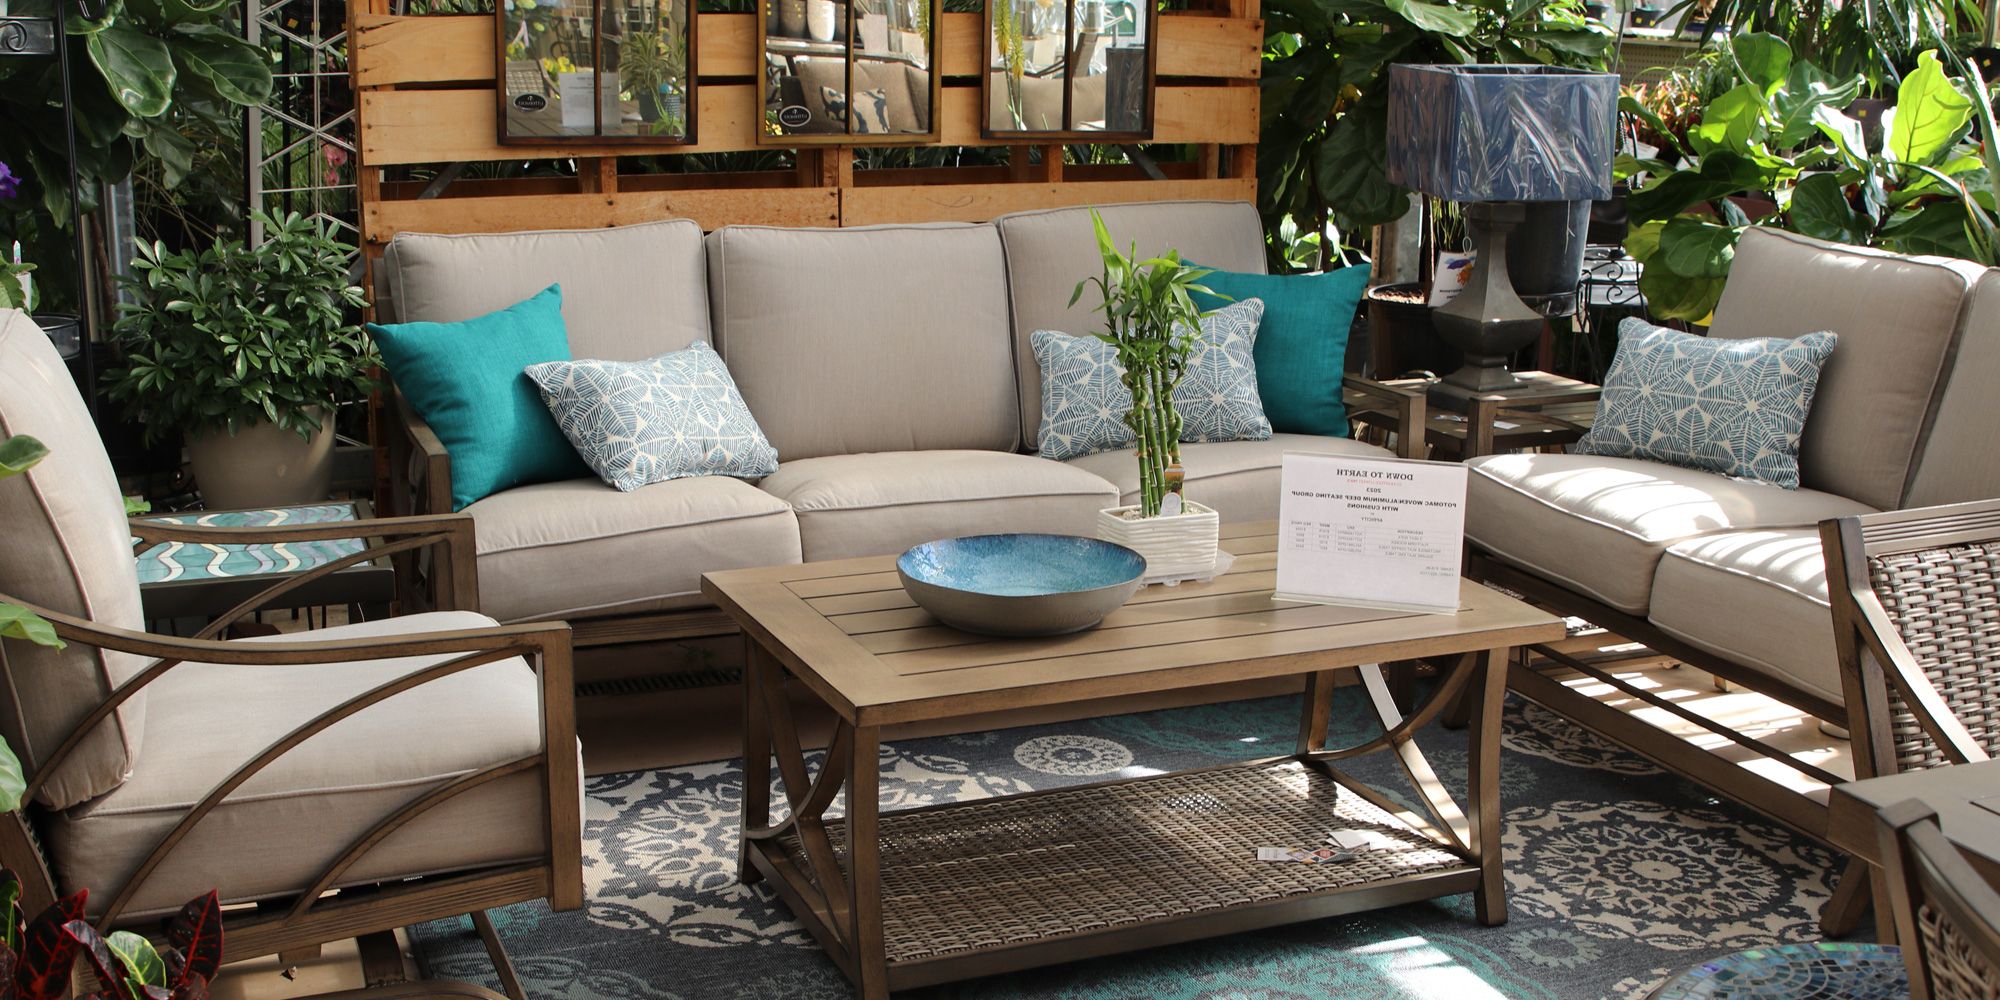 Outdoor And Patio Furniture – Down To Earth Living With Trendy Outdoor Couch Cushions, Throw Pillows And Slat Coffee Table (View 14 of 15)